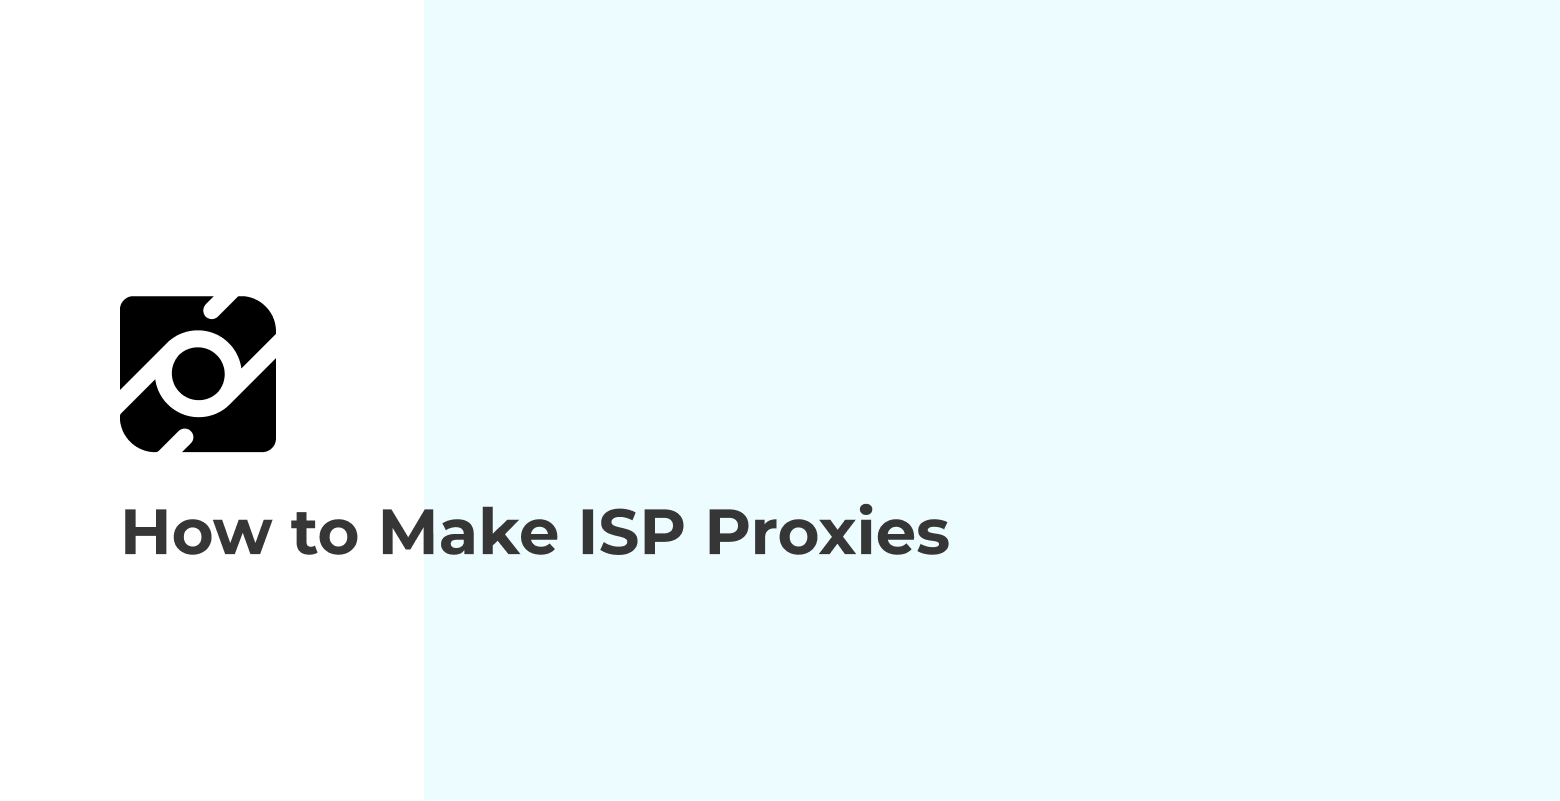 How to Make ISP Proxies